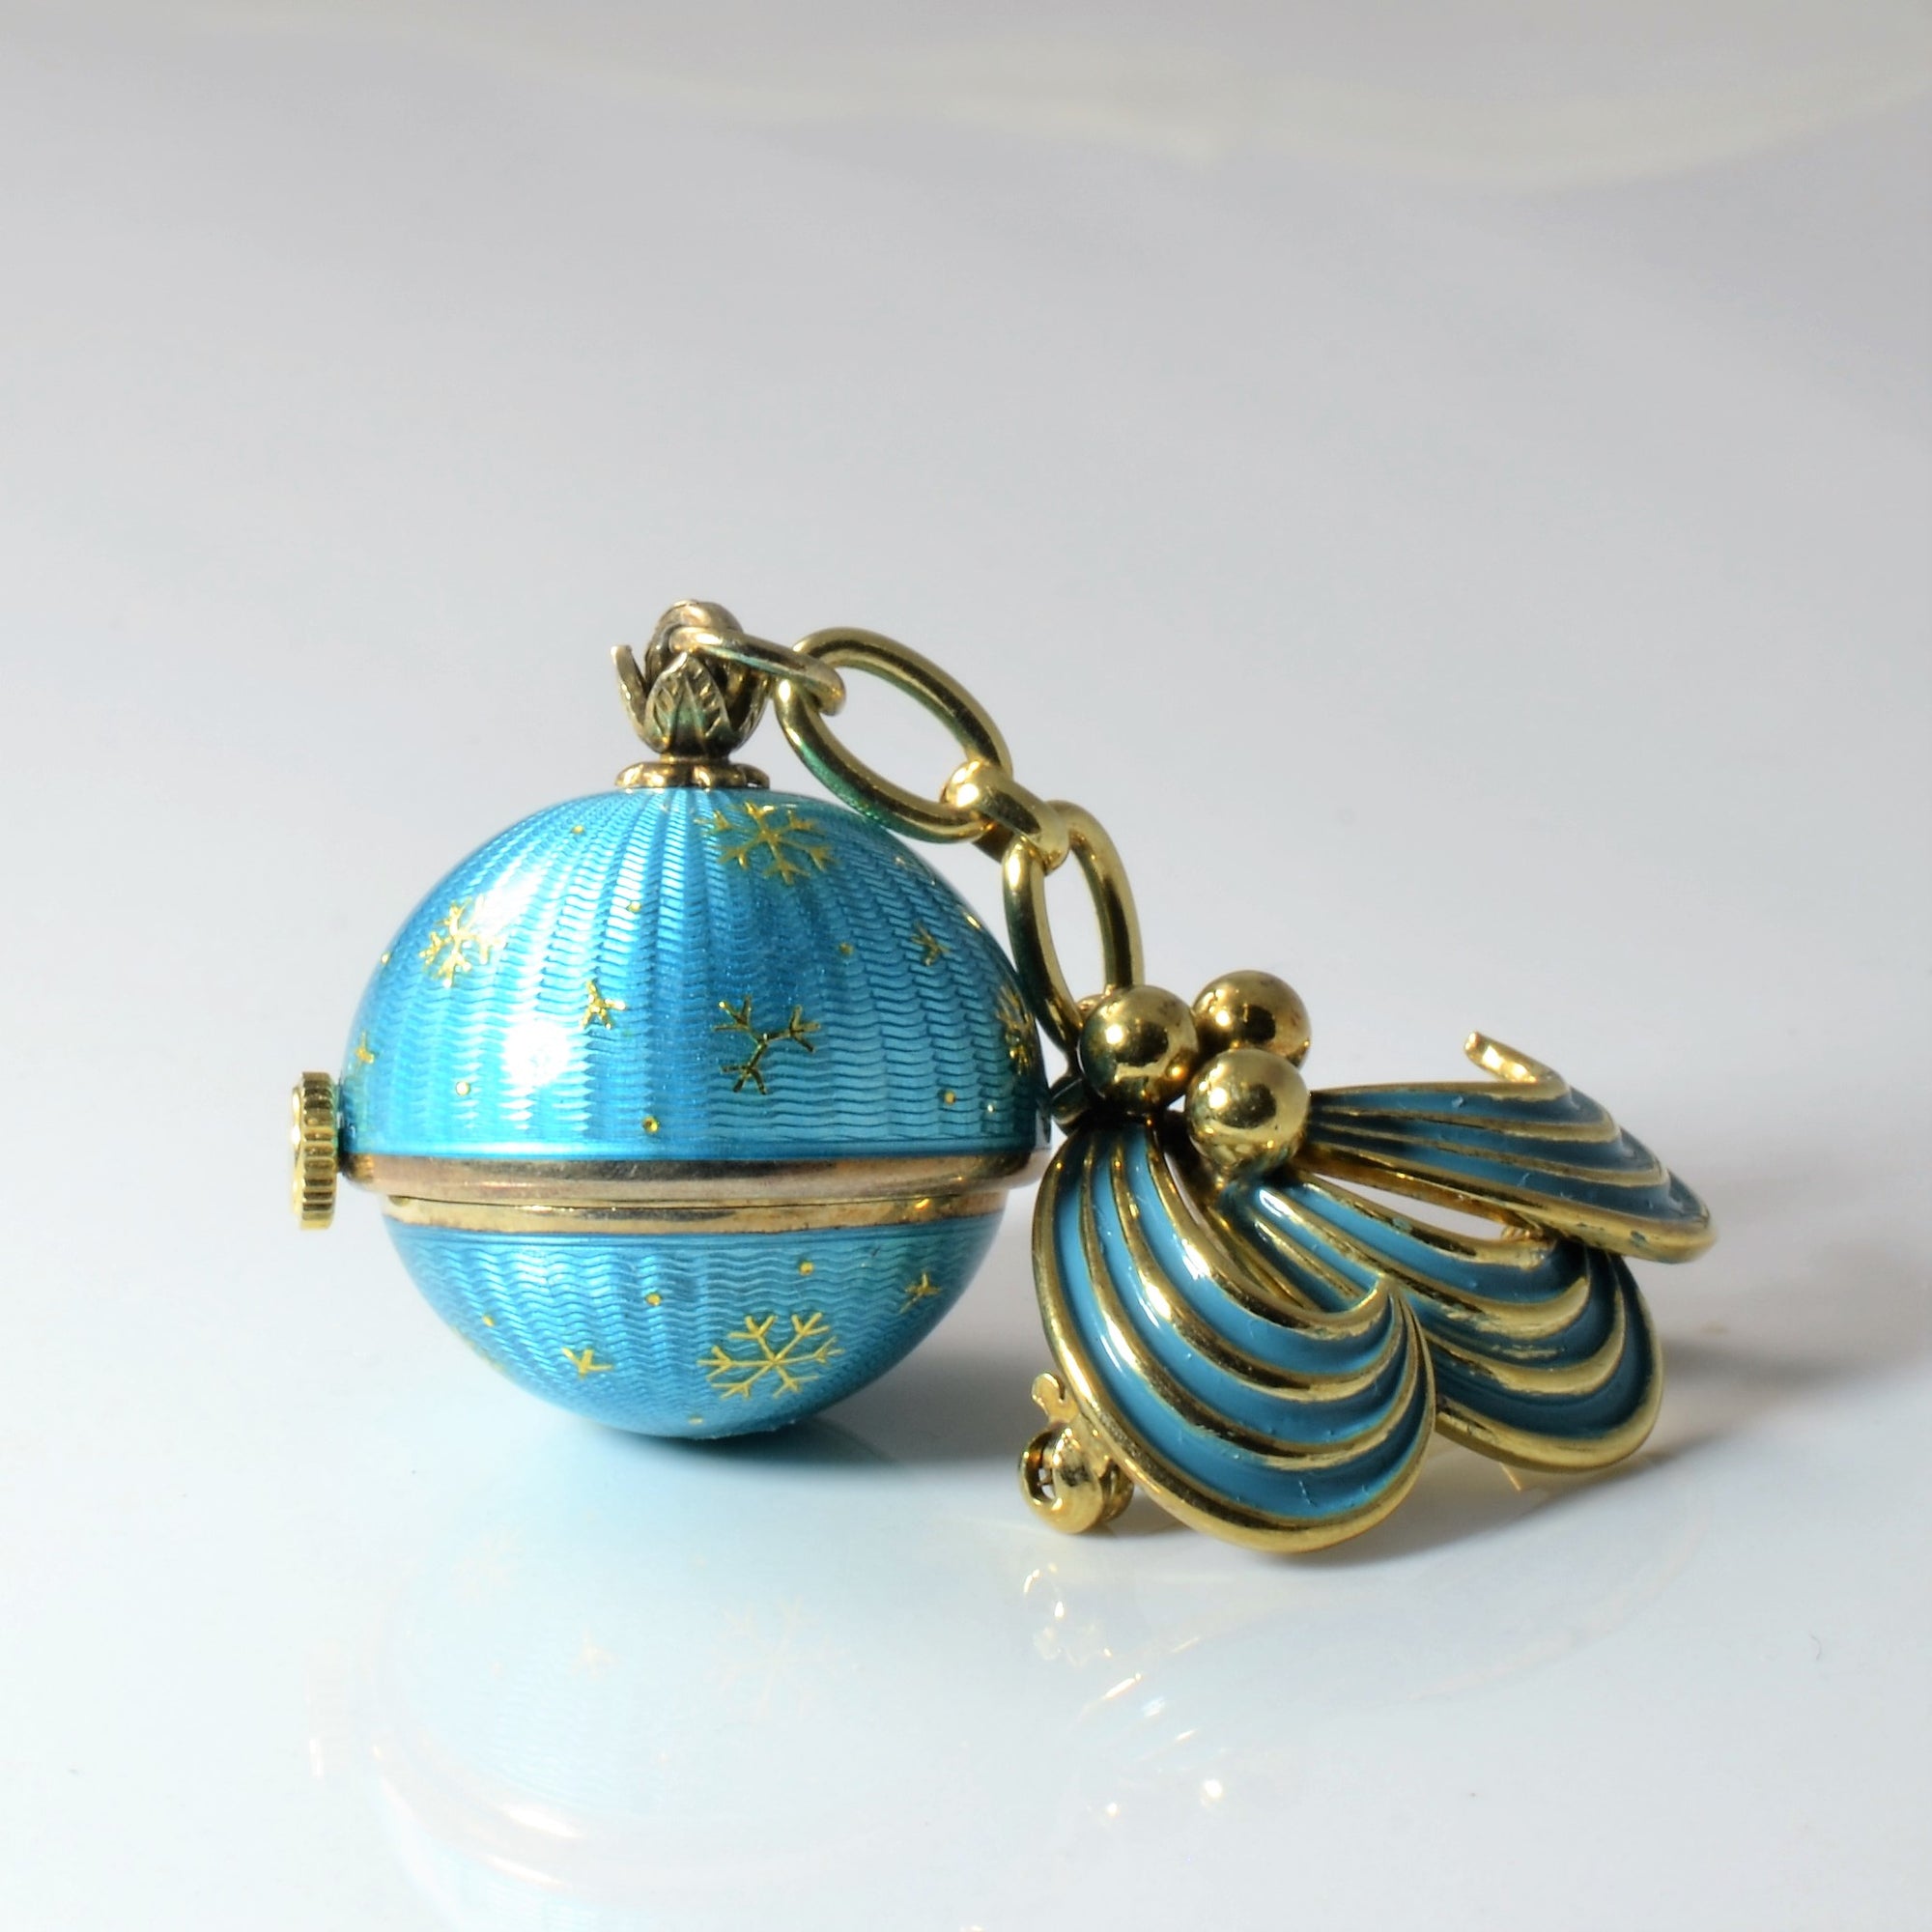 buy vintage brooches online, like this 'Ebel' Blue Brooch, gold chain, enameled brooch.